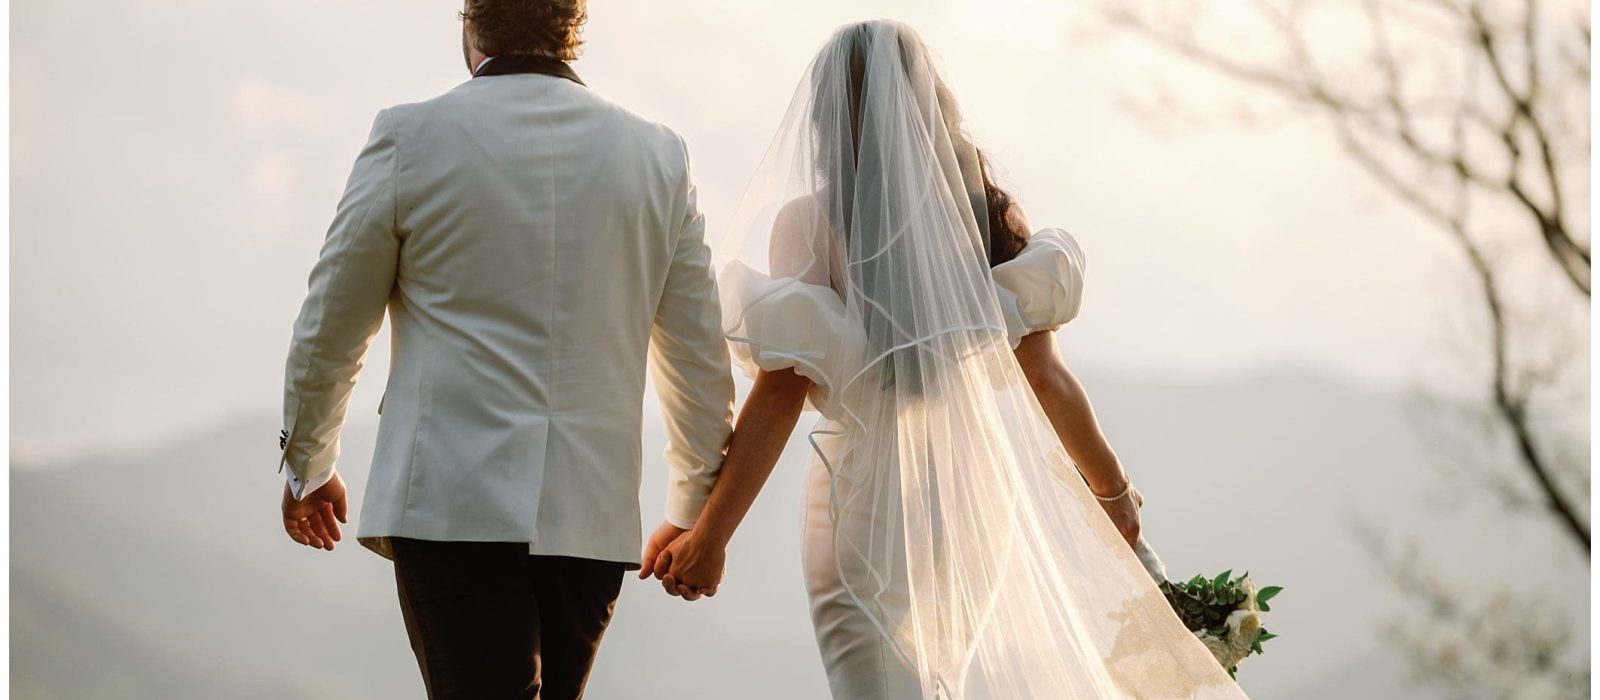 A bride and groom holding hands, walking toward a mountain vista, with the bride wearing a flowing veil and carrying a bouquet.